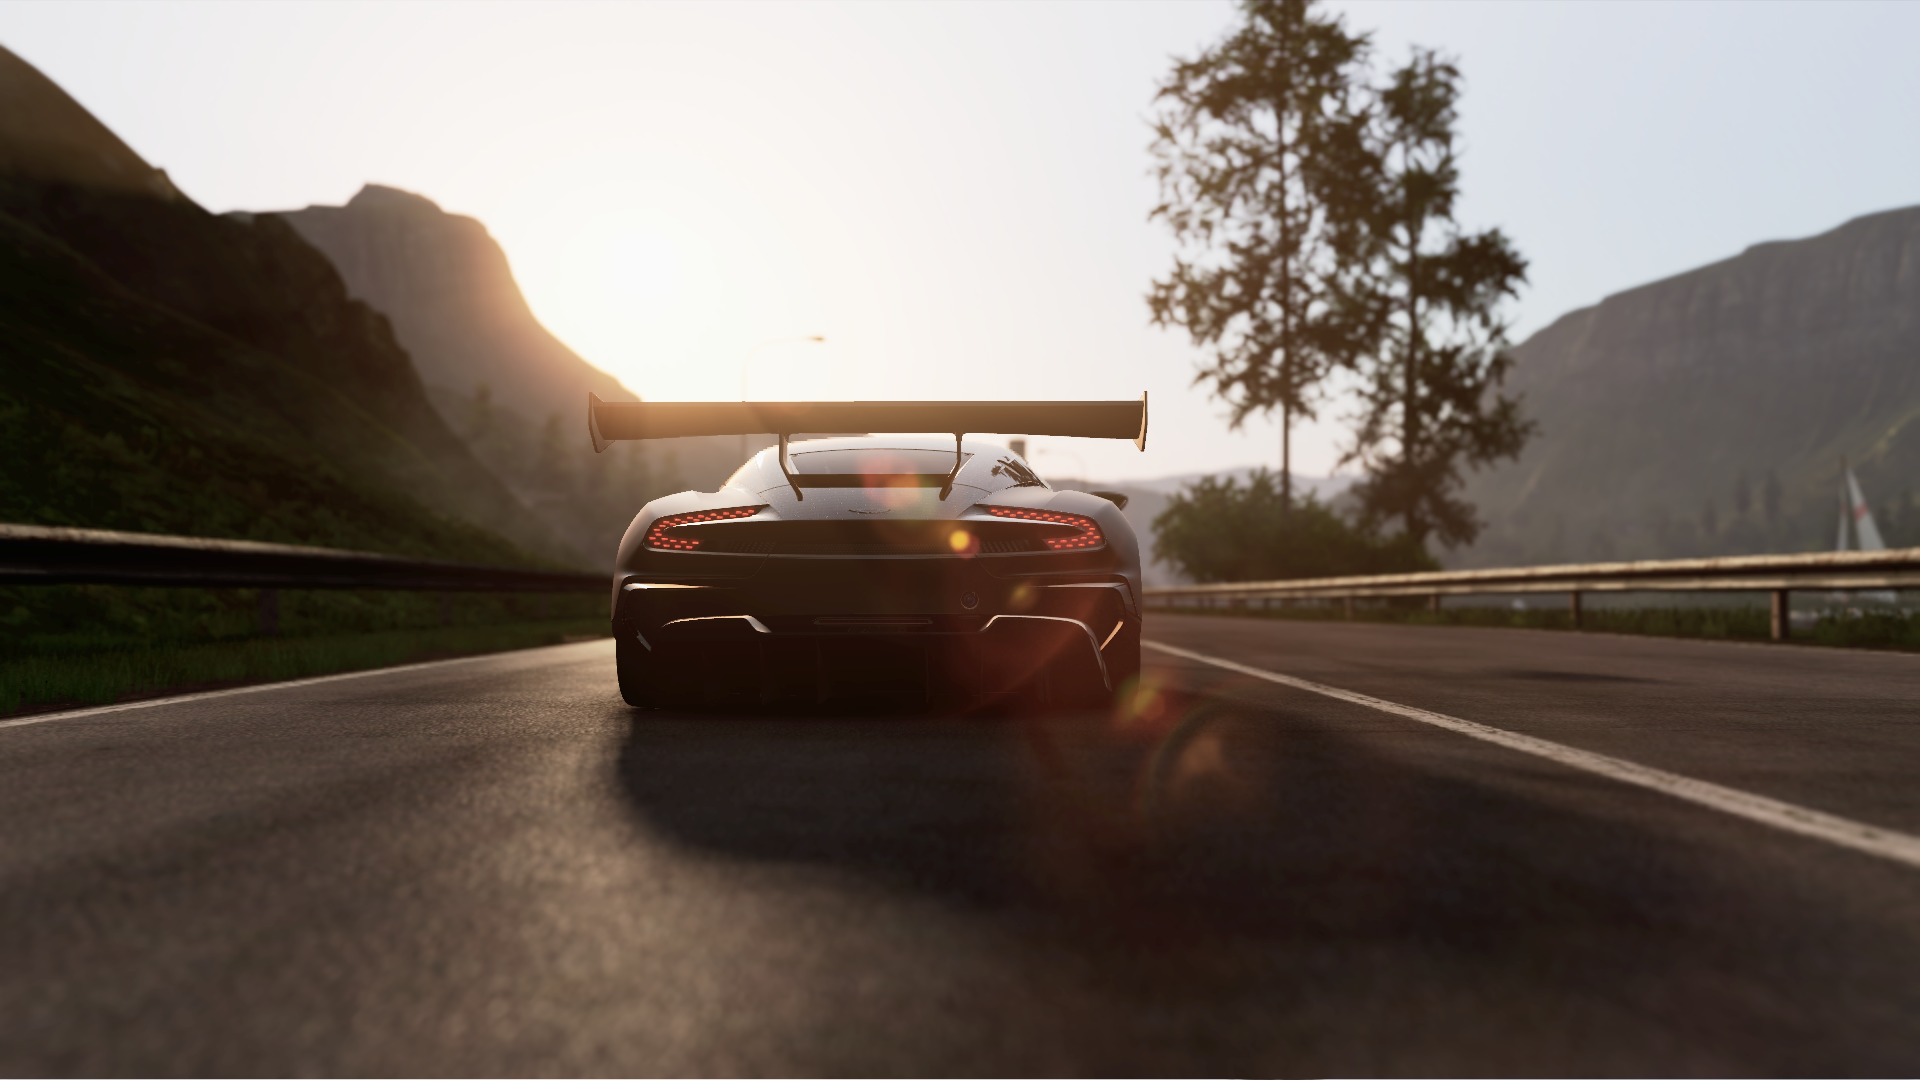 Aston Martin Vulcan Project Cars Project Cars 2 Video Game 1920x1080